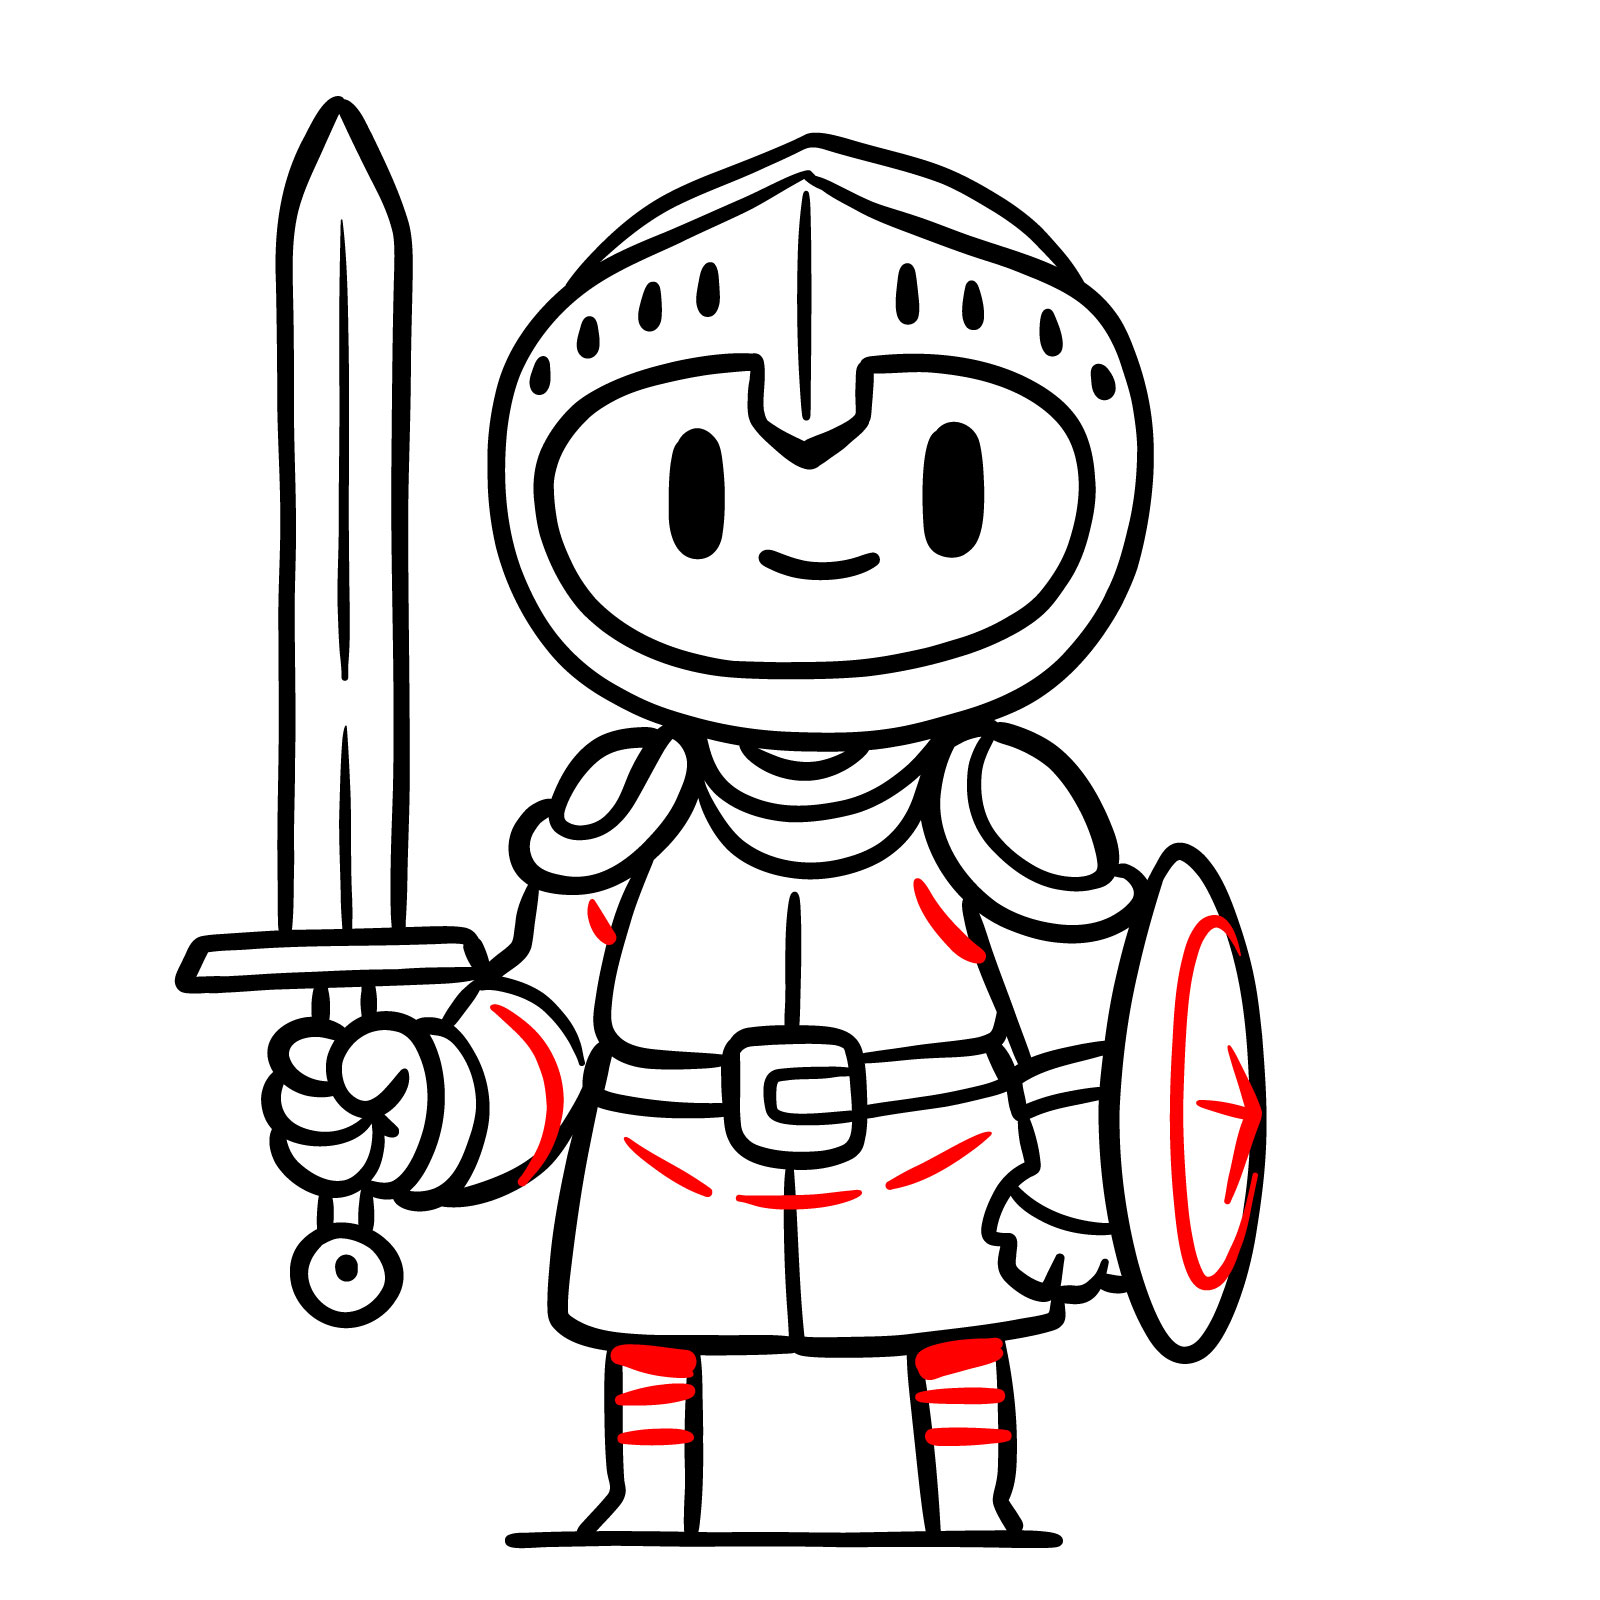 Easy paladin drawing step 14: adding armor and shield details